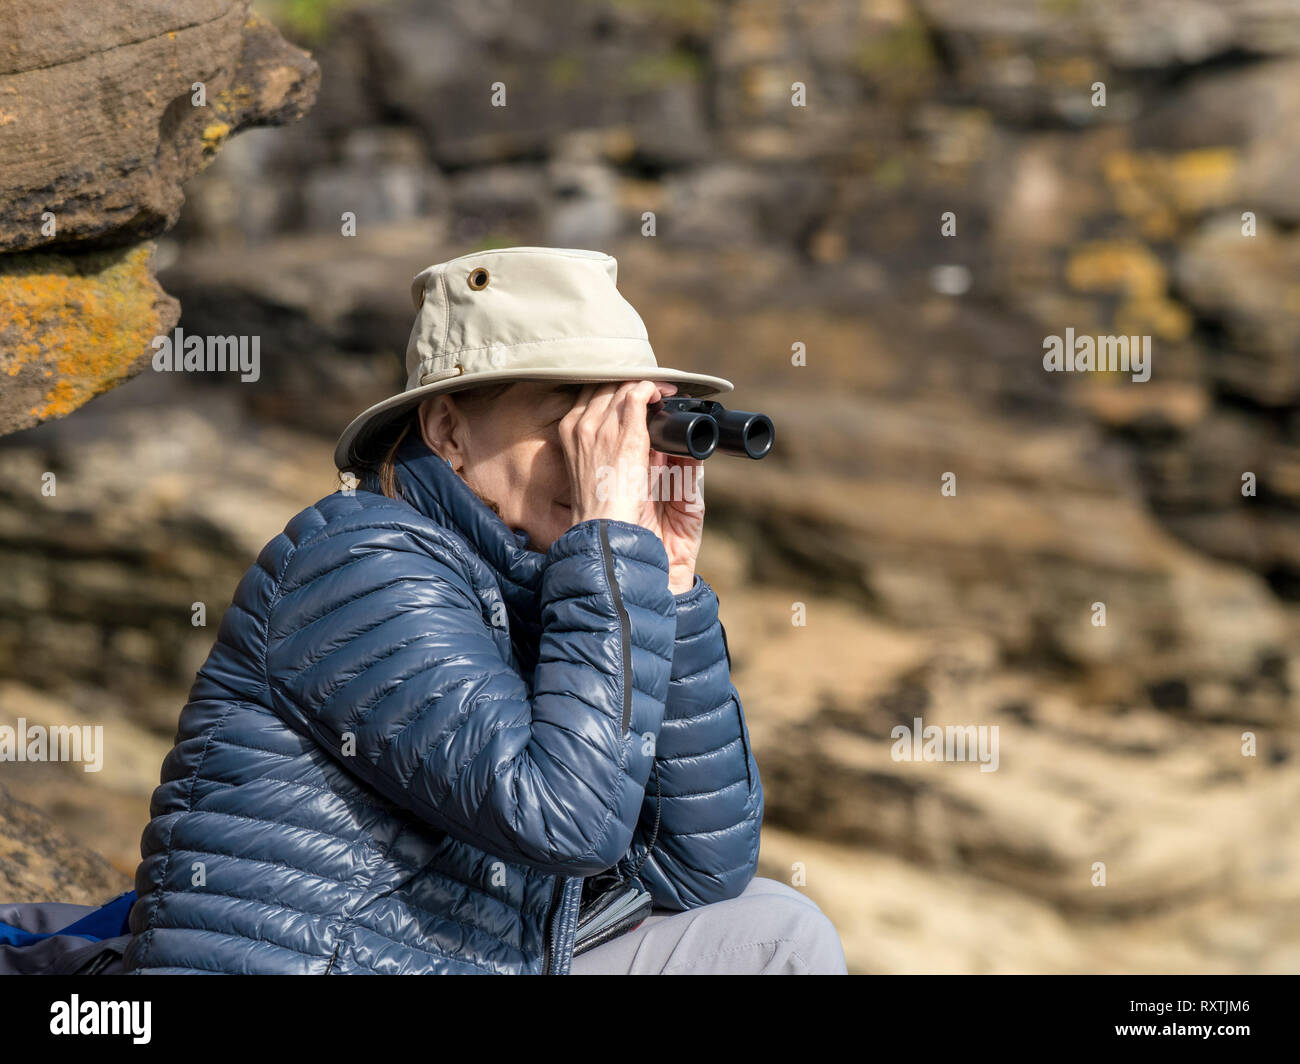 Adult woman wearing sun hat and padded puffer jacket looking through binoculars wildlife watching with rocky cliffs behind, Isle of Skye, Scotland, UK Stock Photo